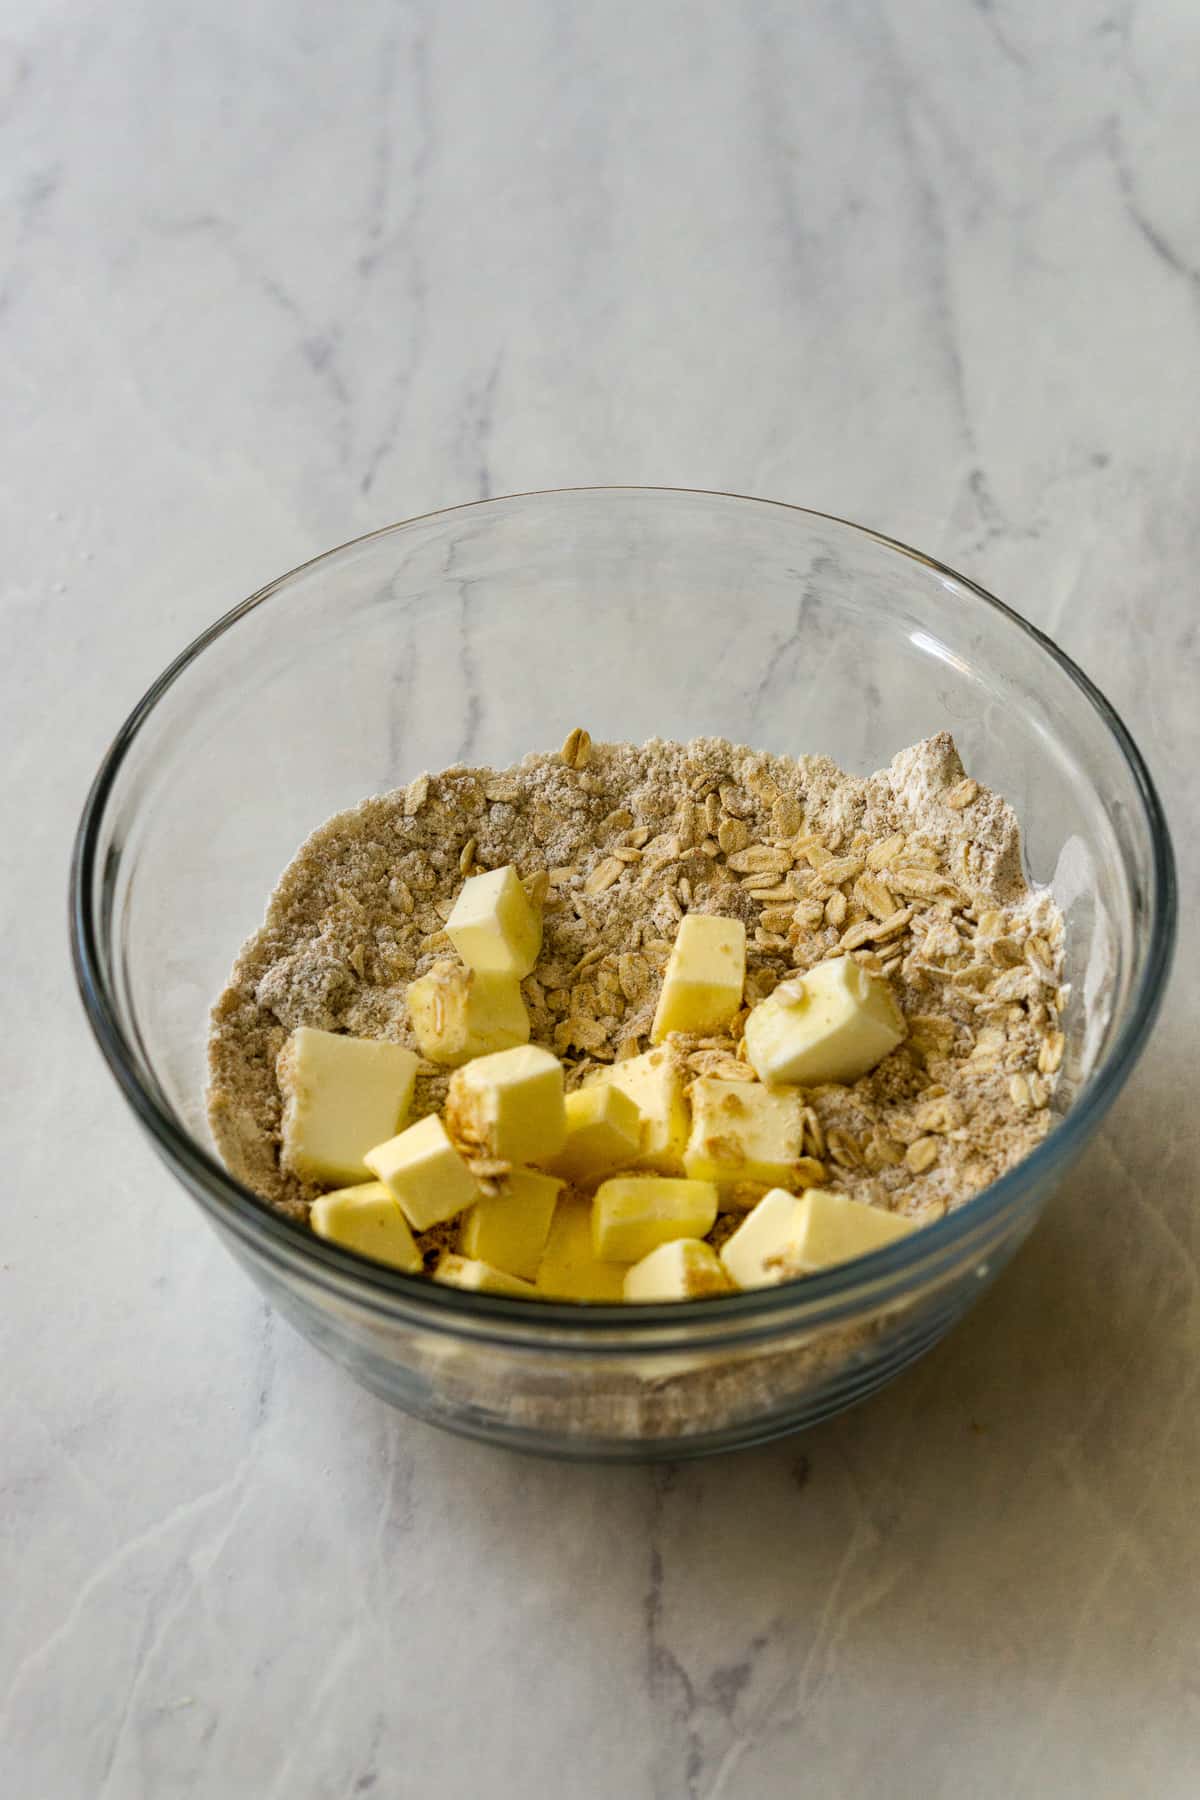 Combined flour, rolled oats, cinnamon, brown sugar with the cubes of butter in a glass bowl.